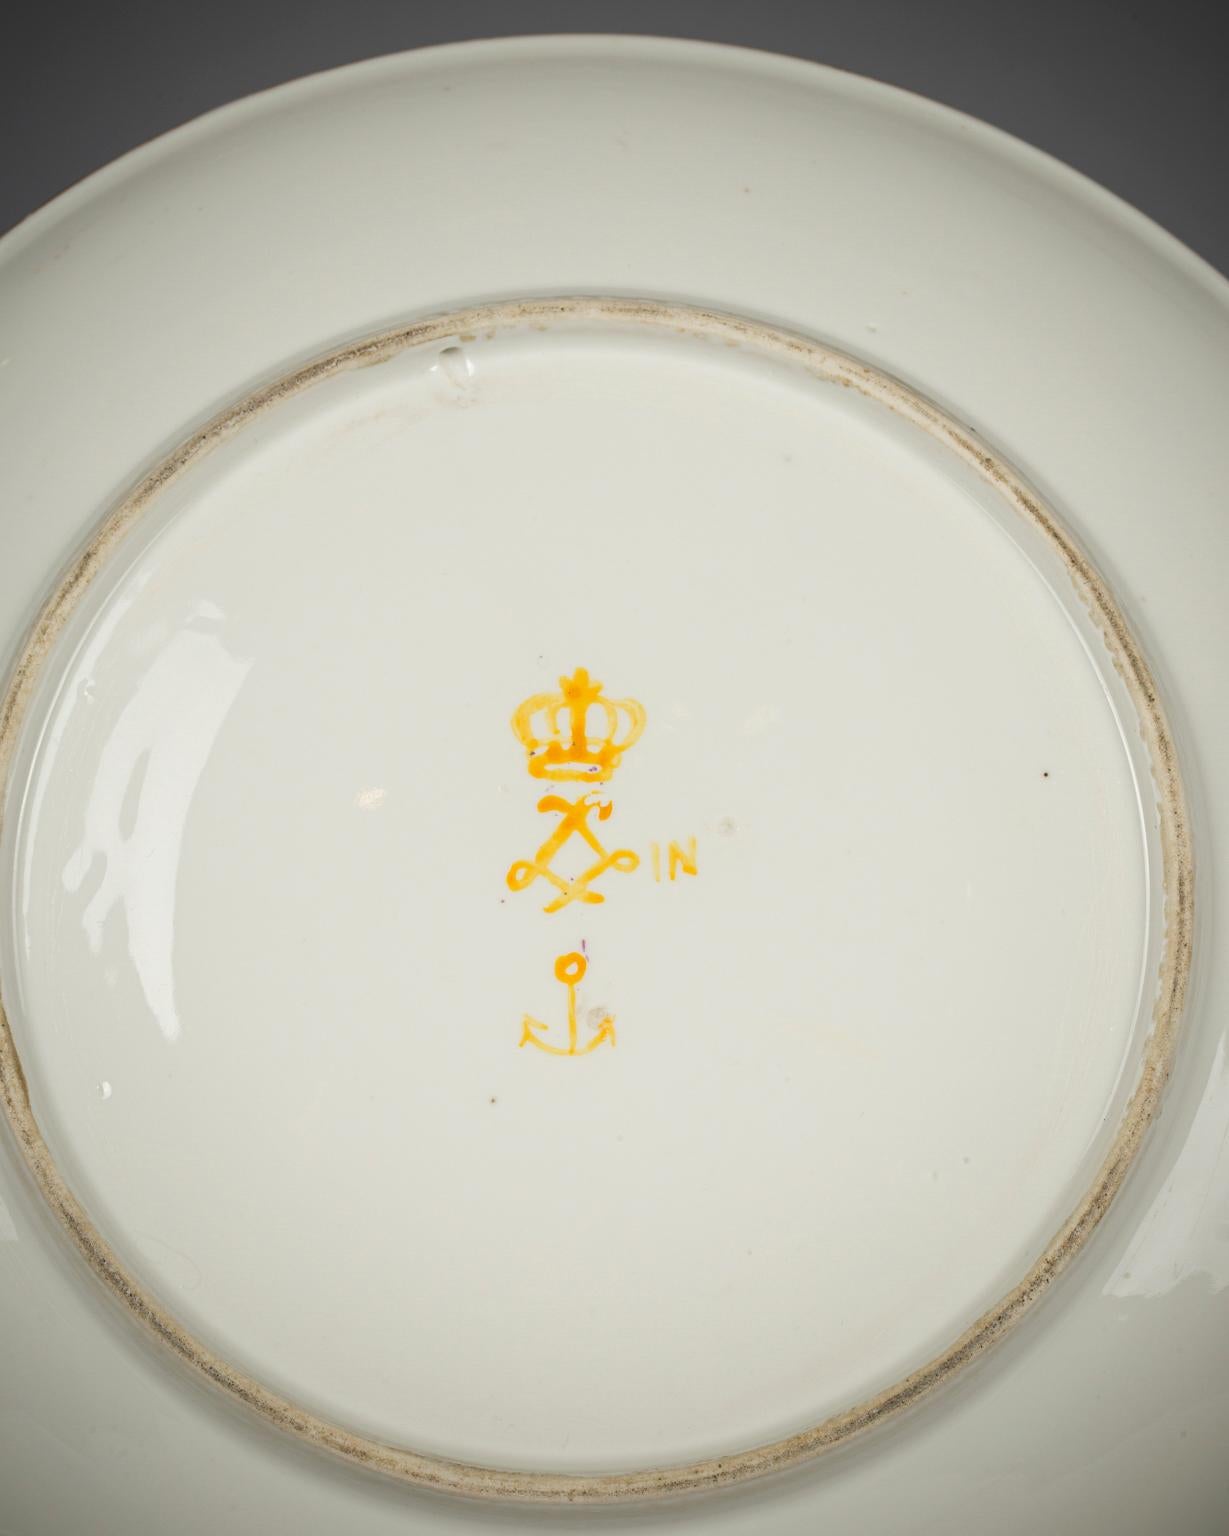 Late 18th Century Sèvres White Glazed and Gilt Porcelain Écuelle, Cover and Underplate, circa 1775 For Sale